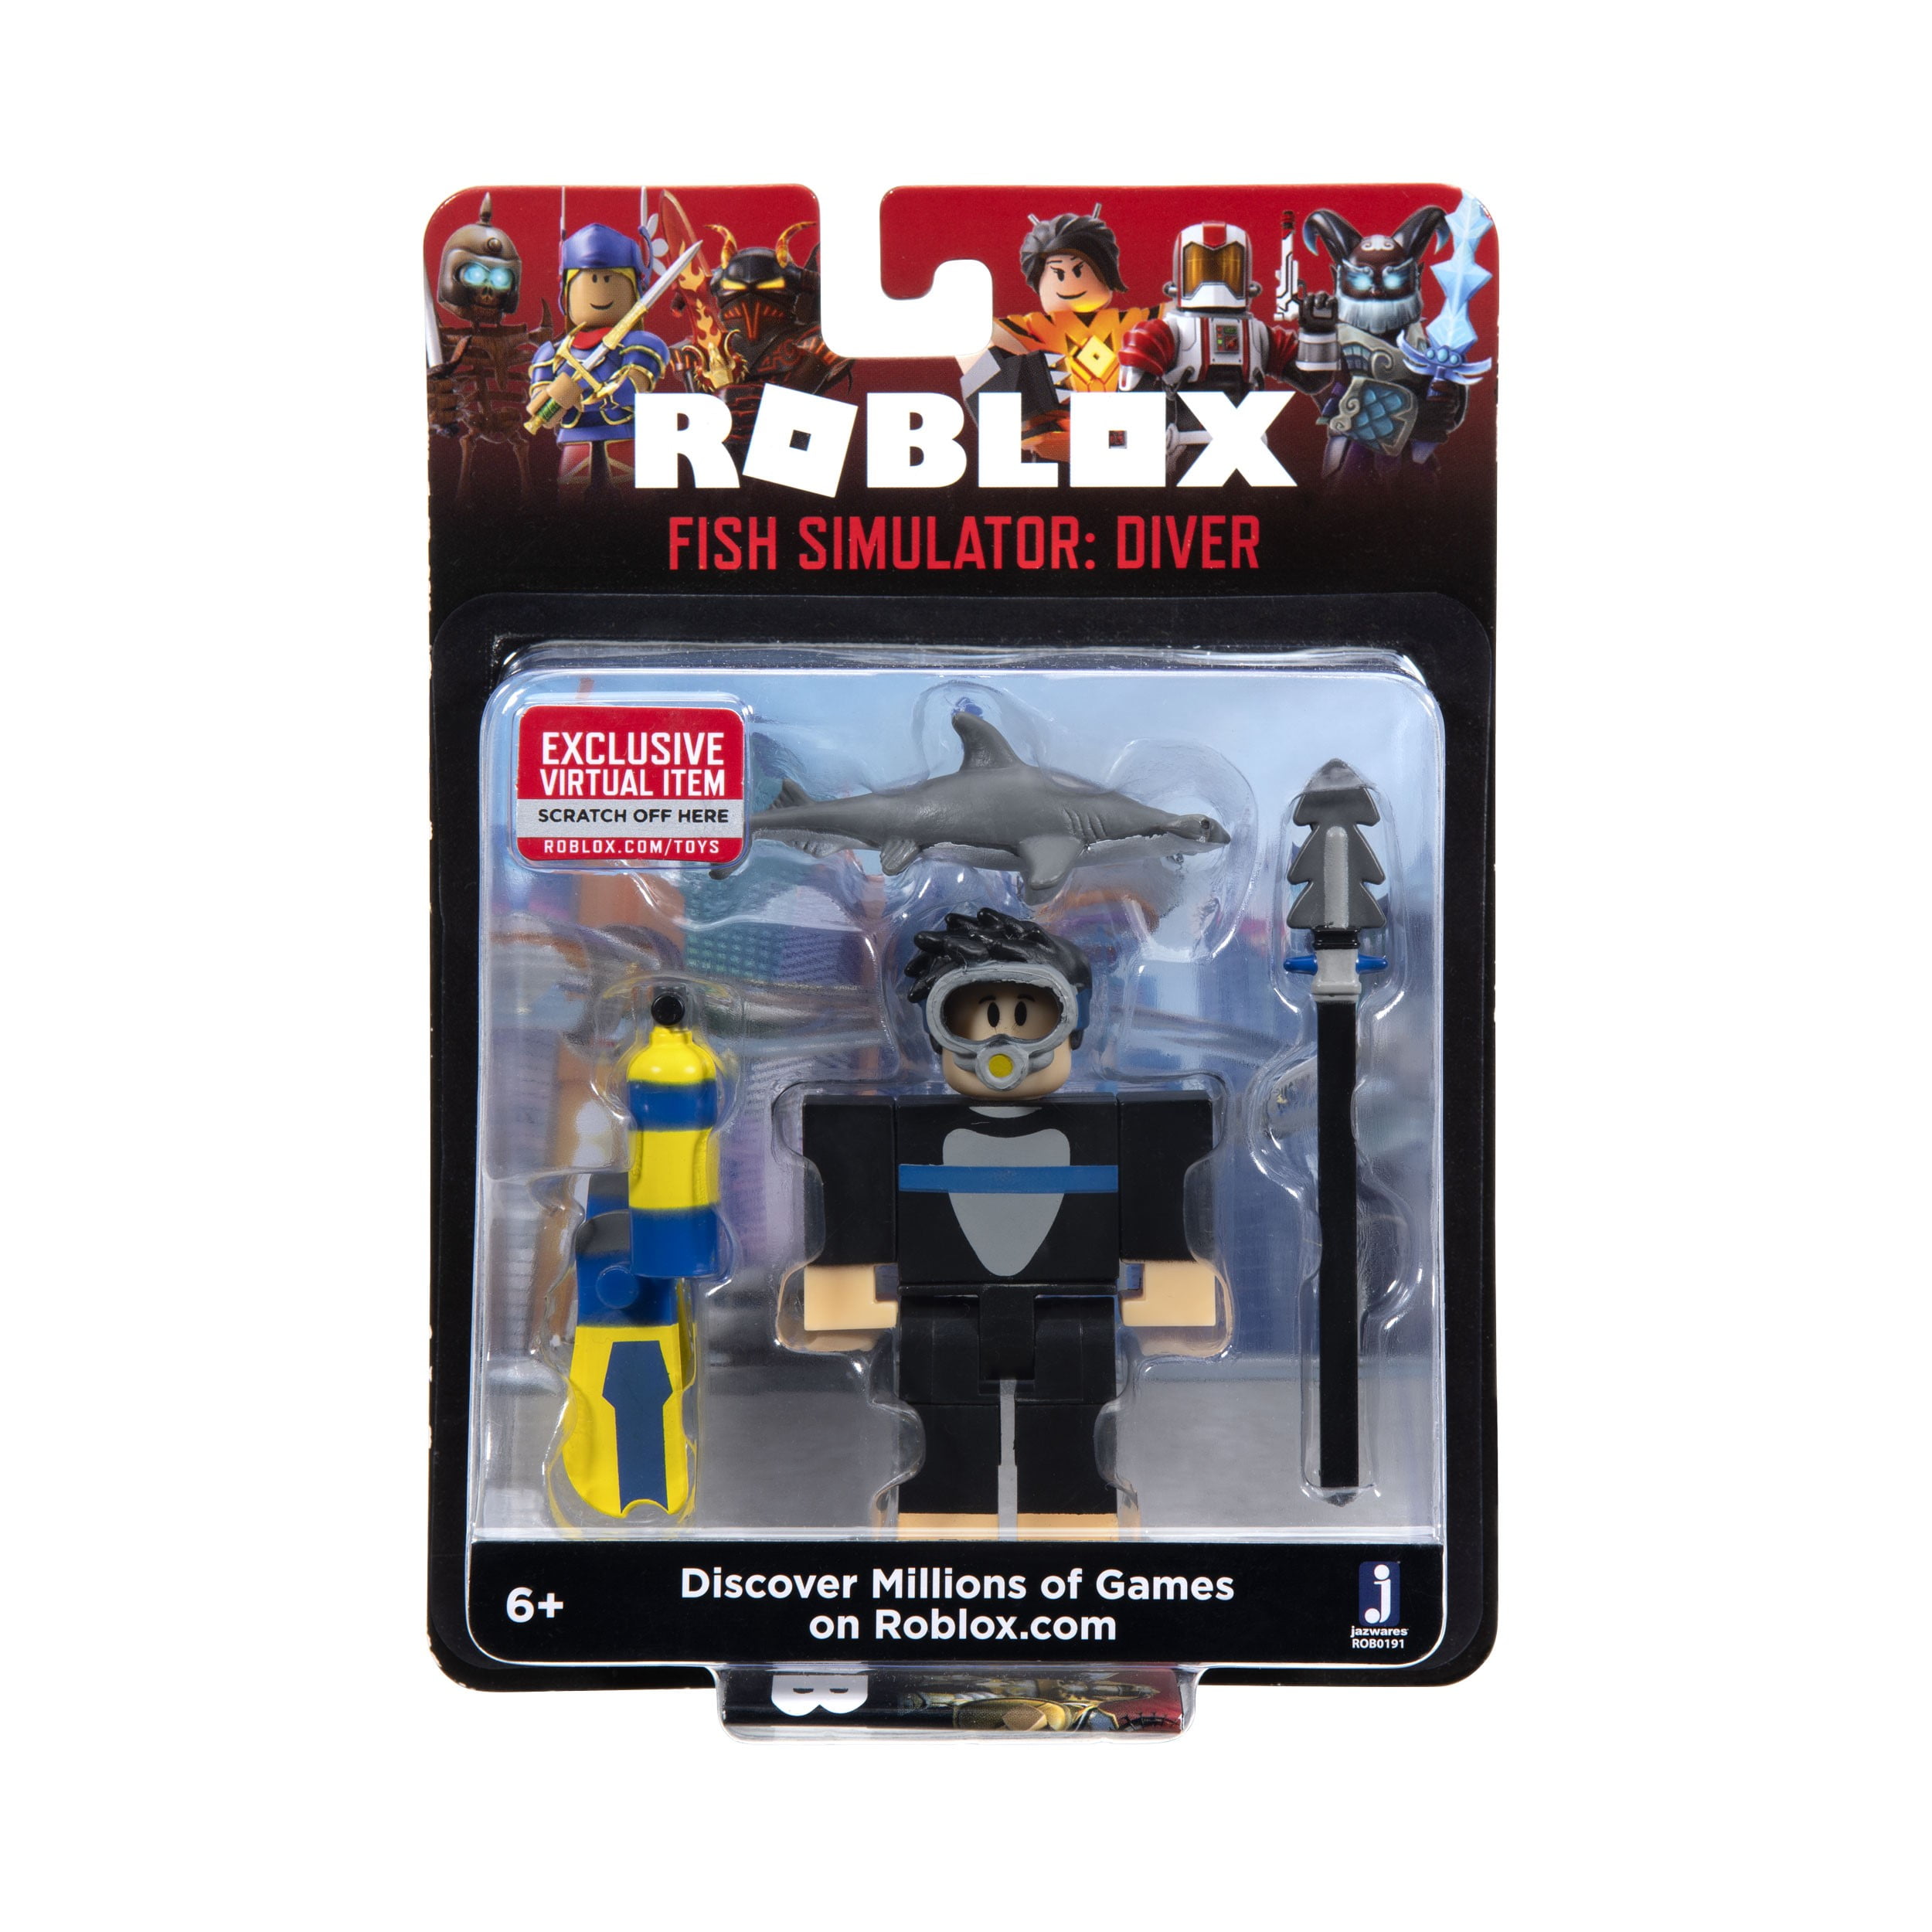 Roblox Action Collection - Night of the Werewolf Six Figure Pack [Includes  Exclusive Virtual Item]